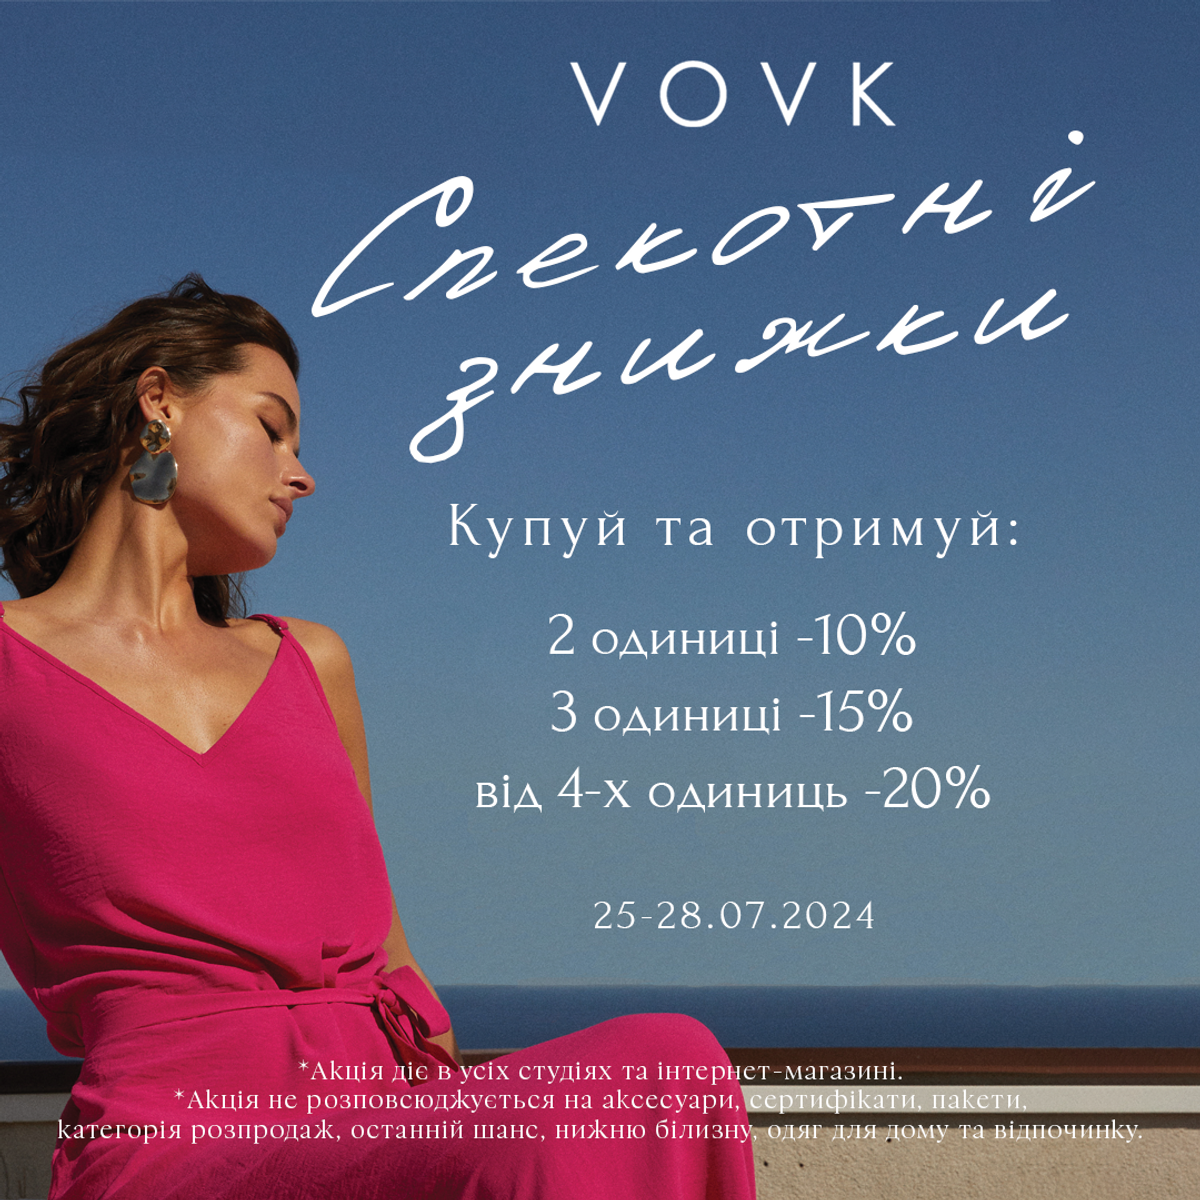 Catch hot discounts on VOVK clothing